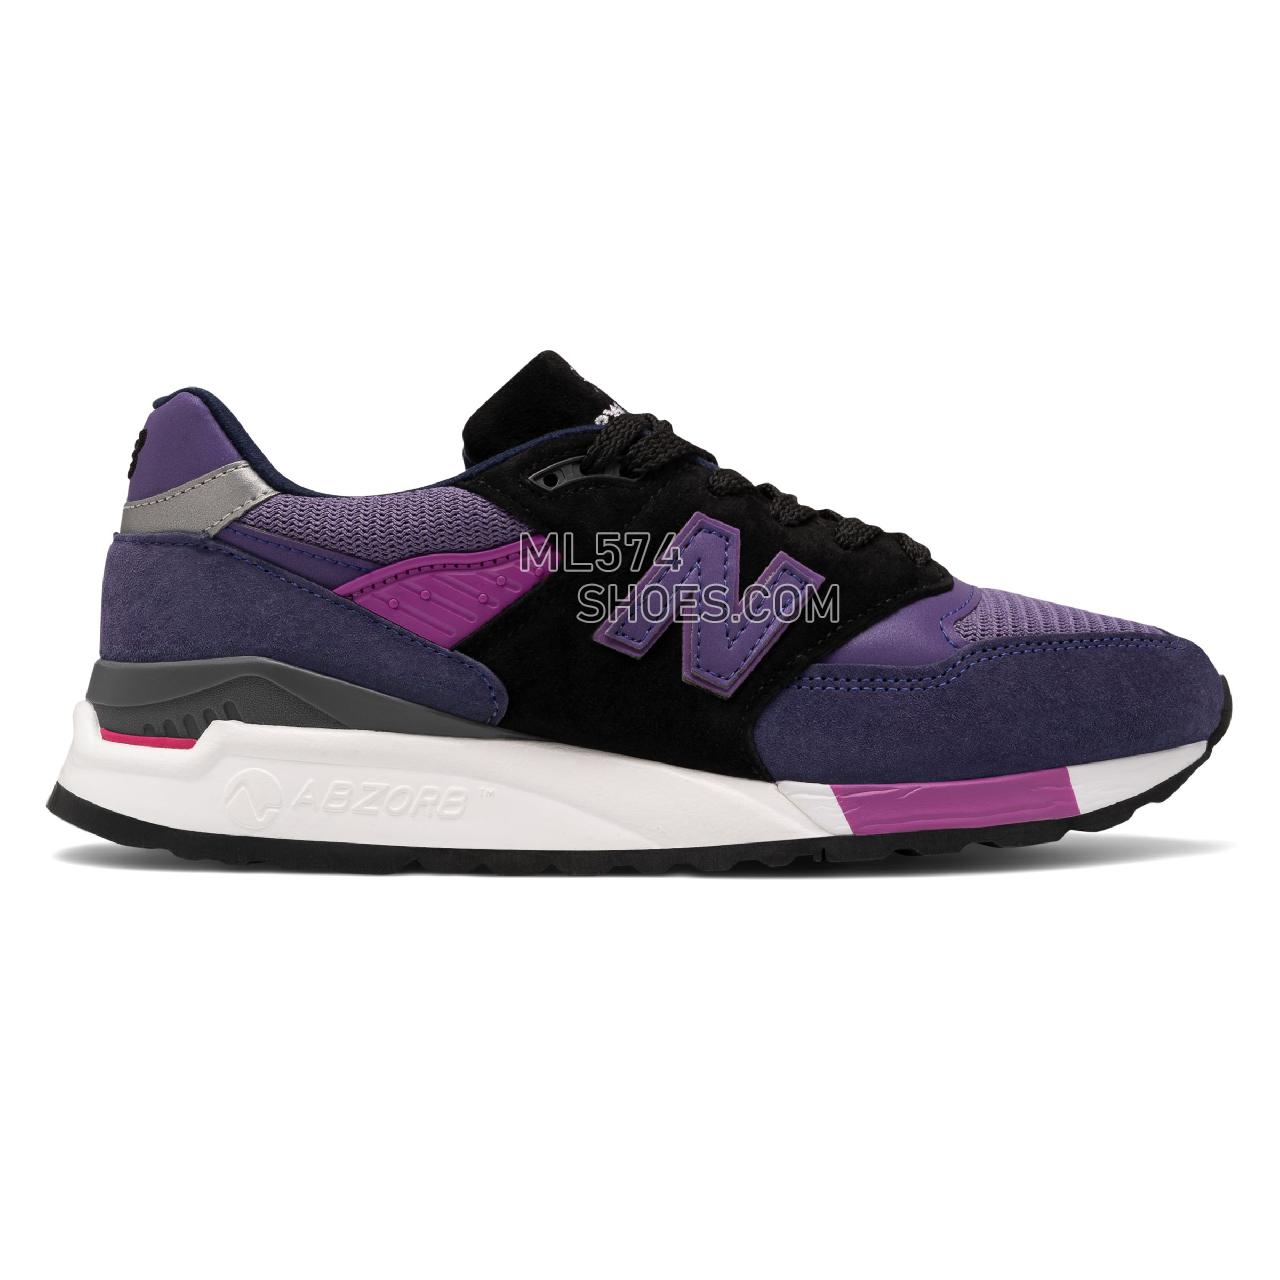 New Balance Made in US 998 - Men's Made in US 998 Classic ML998V1-27545-M - Purple with Black - M998BLD